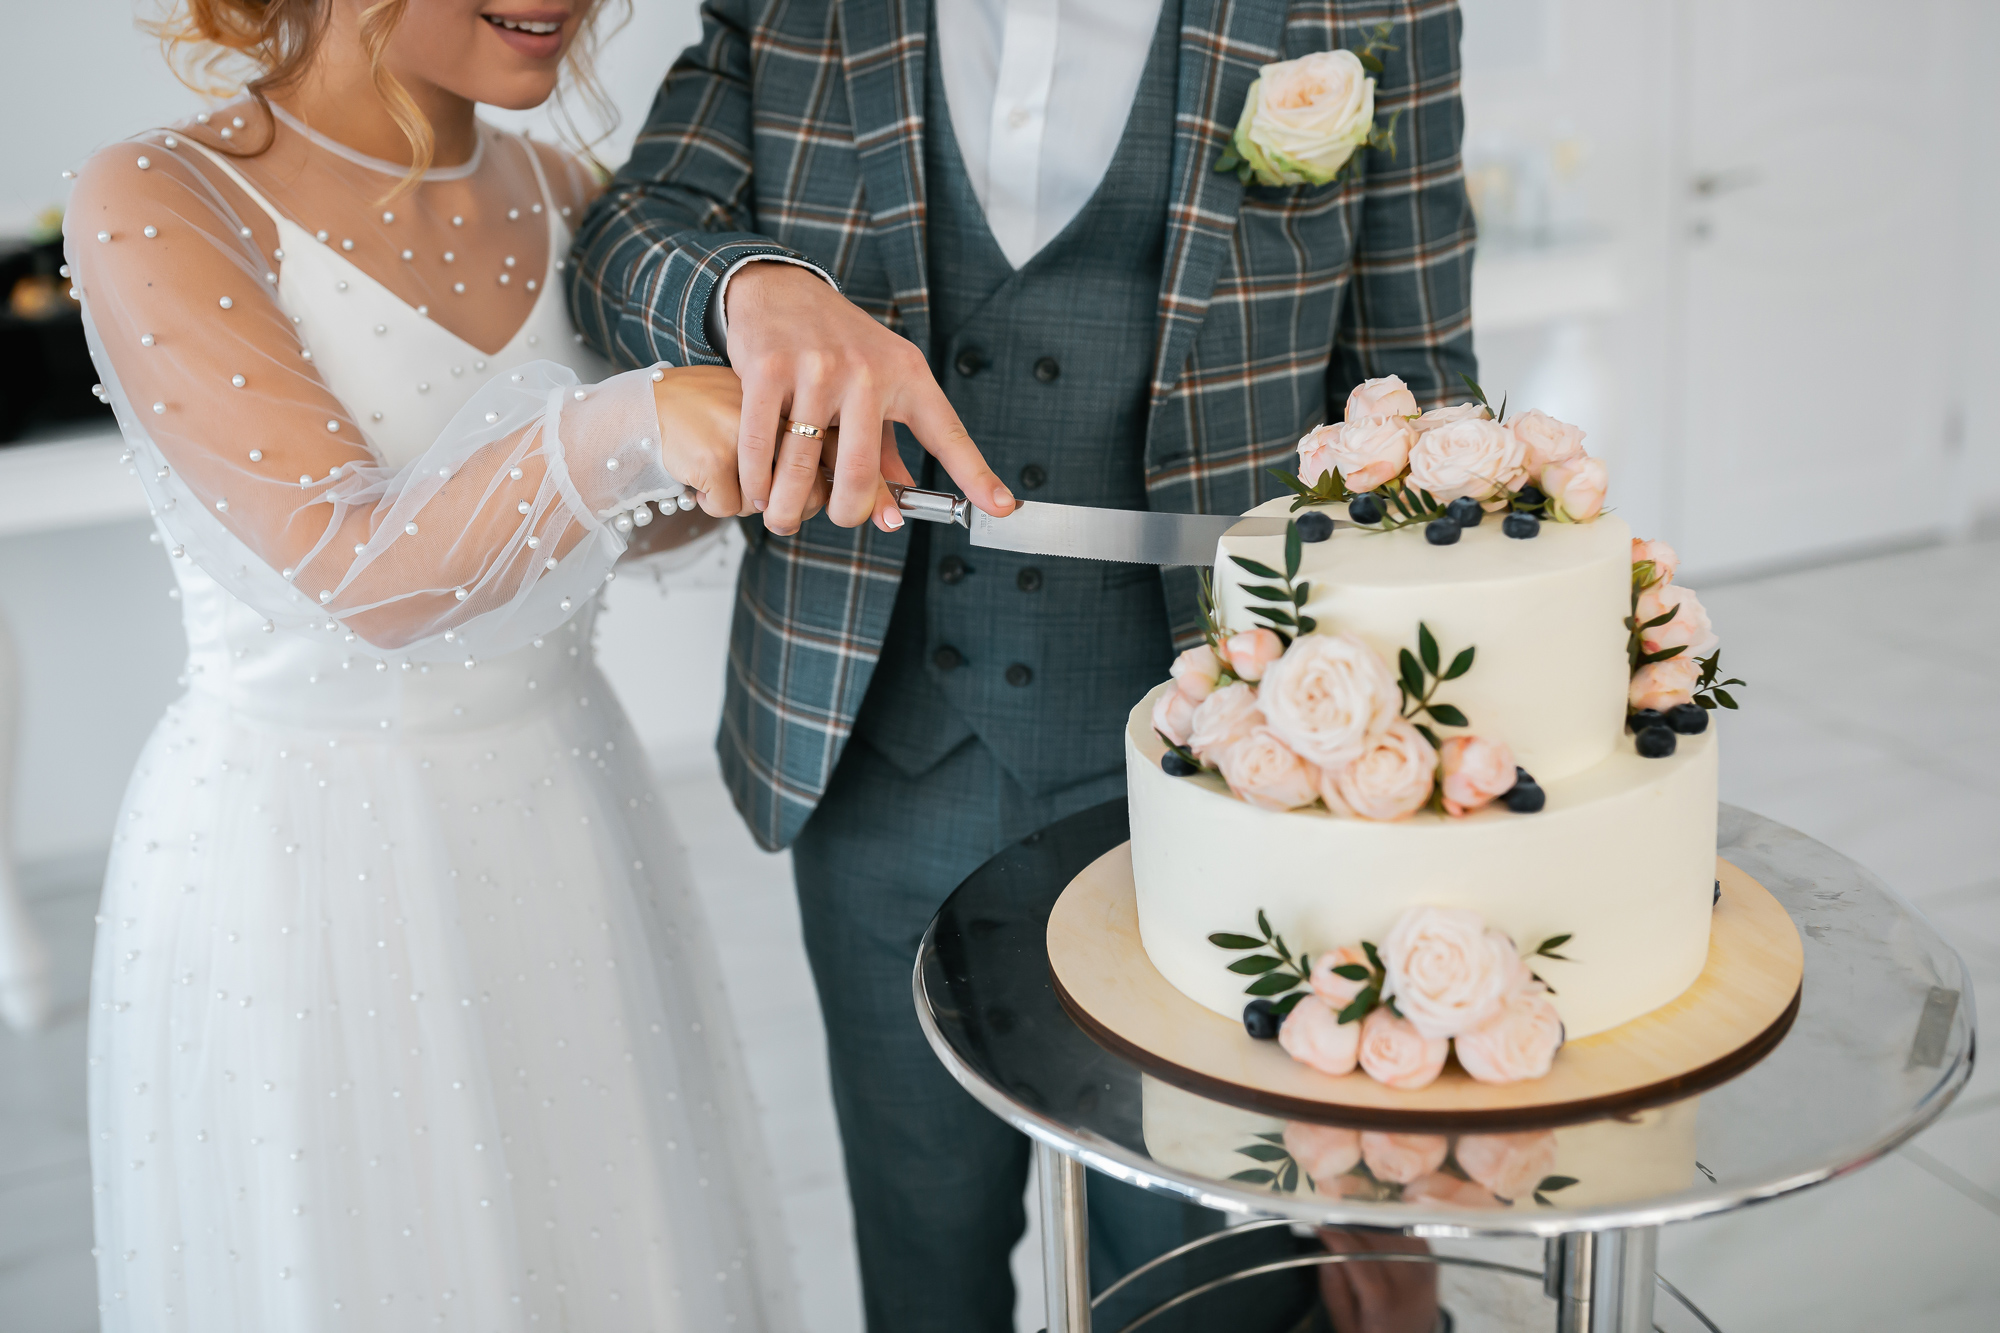 Elements of Traditional and Modern Wedding Cakes